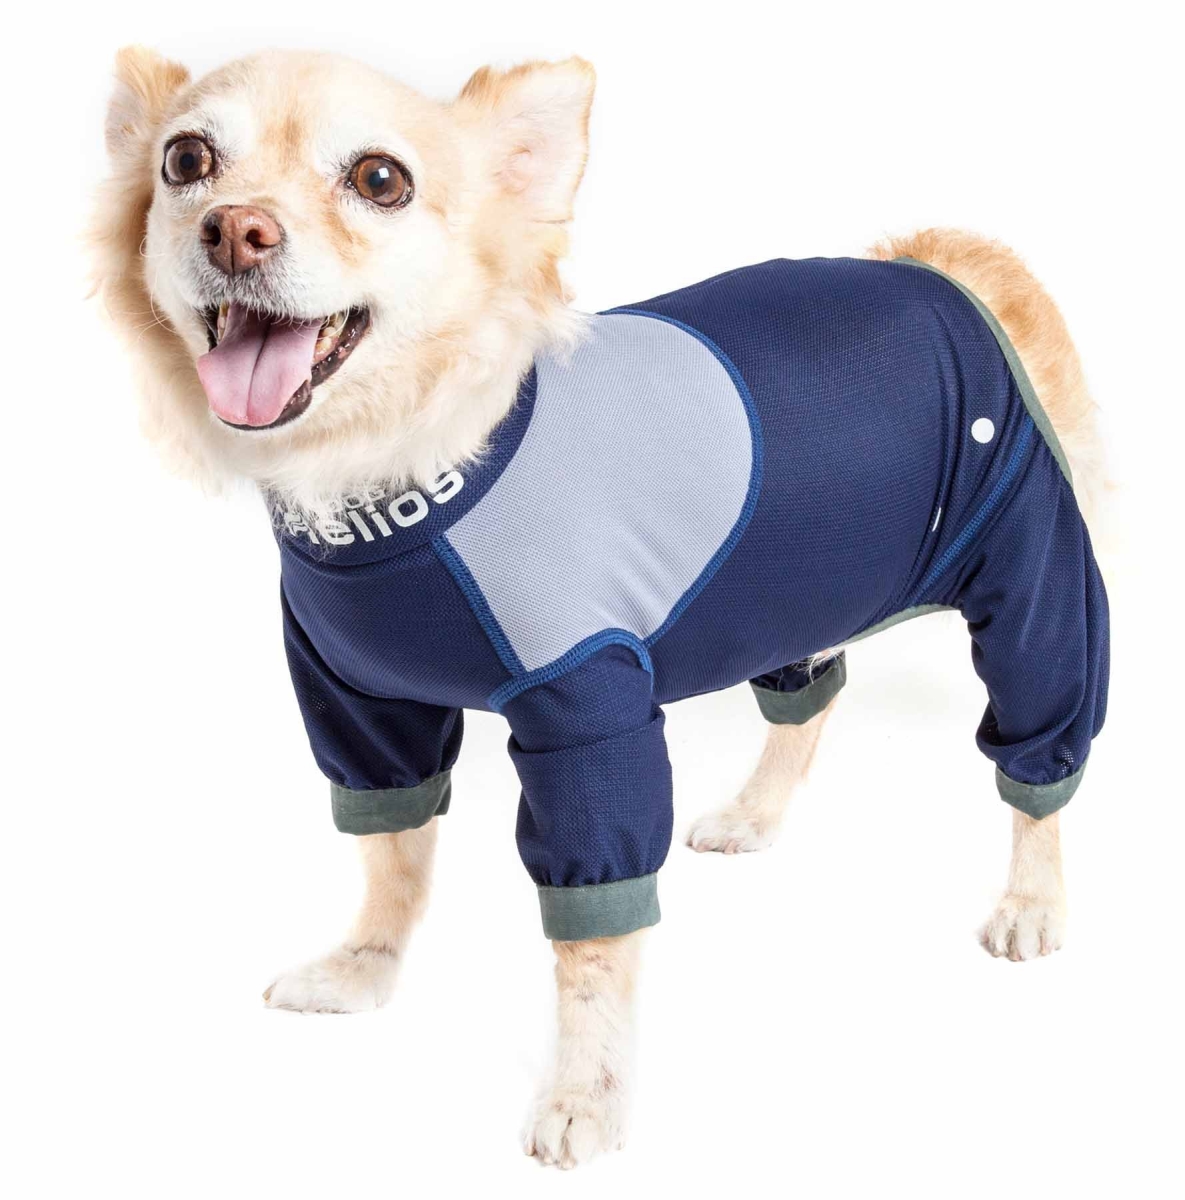 Yghl9bllg Tail Runner 4-way-stretch Breathable Full Bodied Performance Dog Track Suit - Blue & Grey, Large